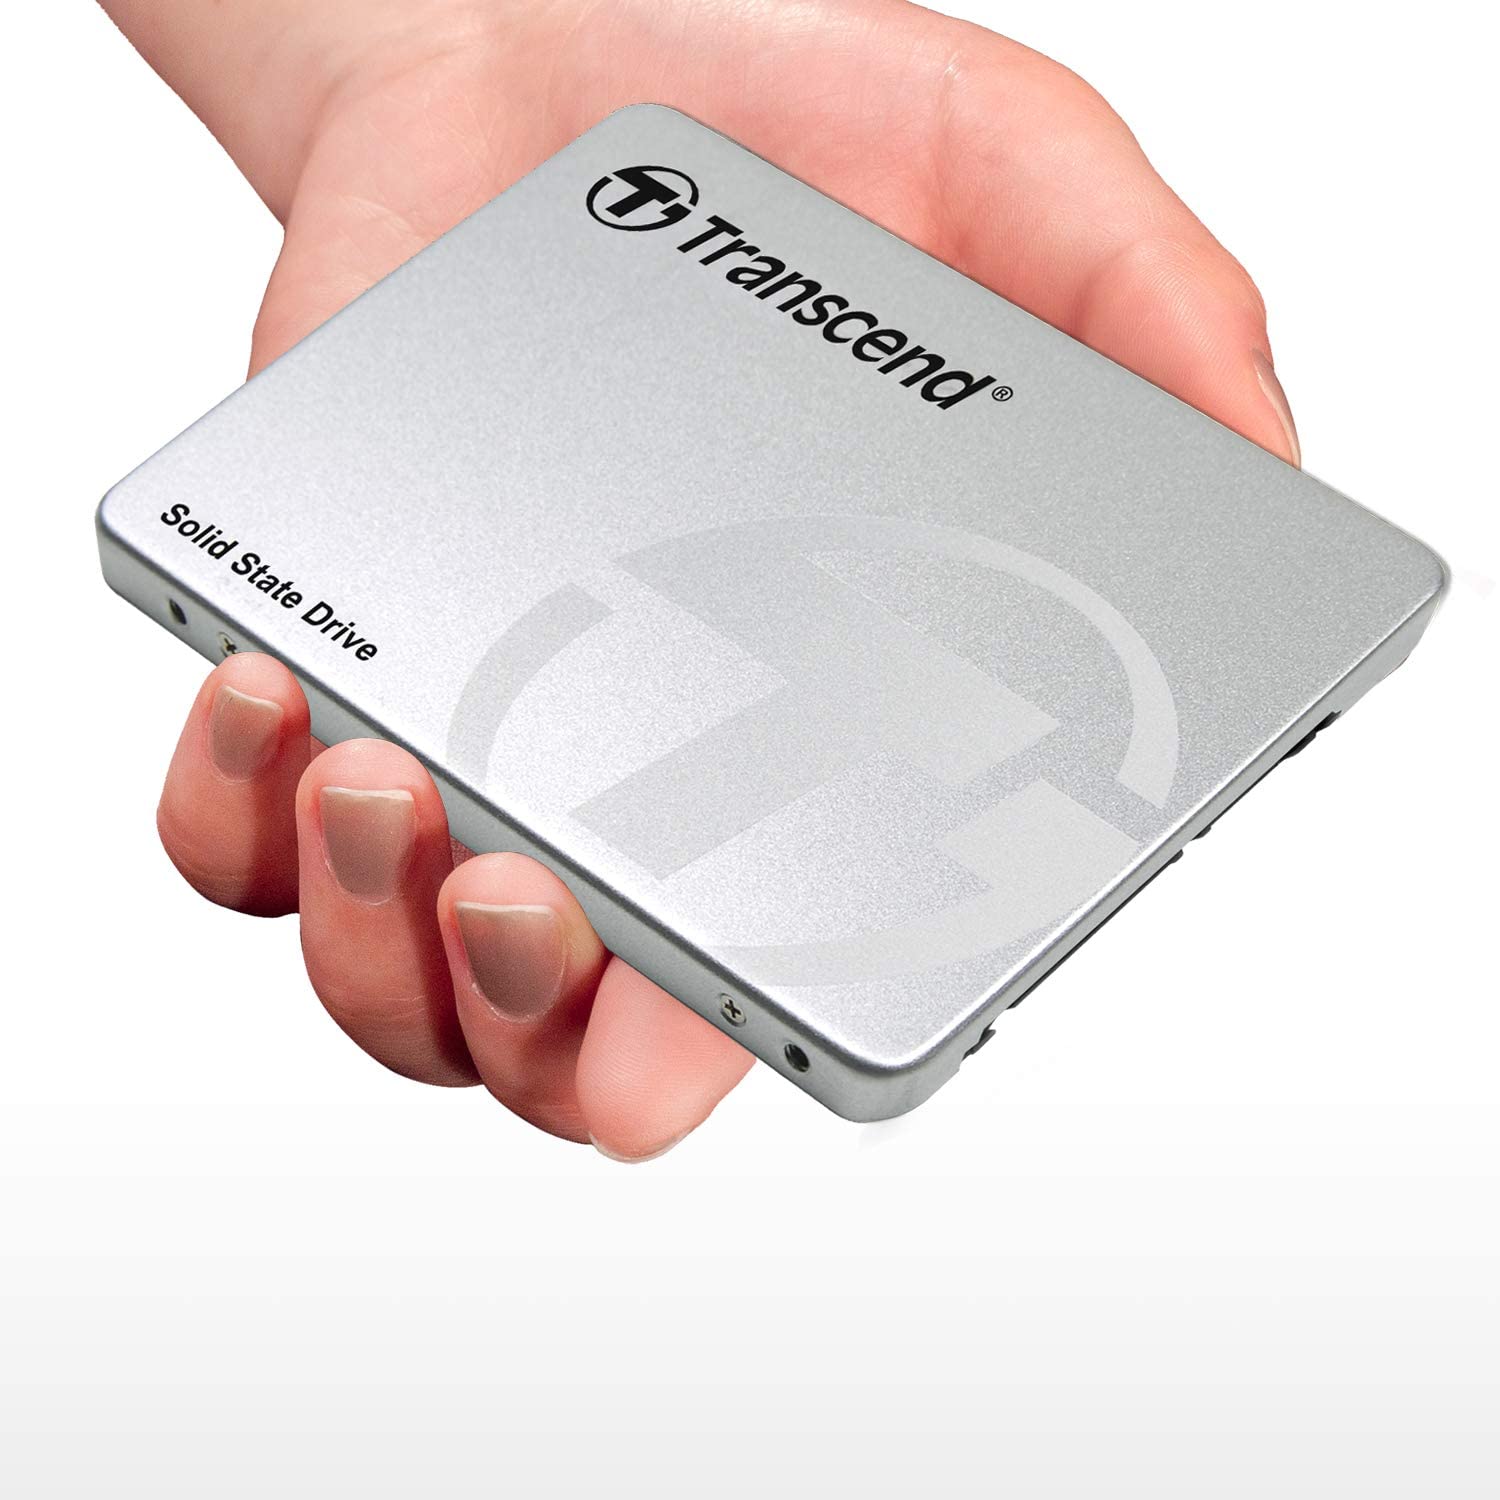 Transcend SSD Scope 4.18 download the new version